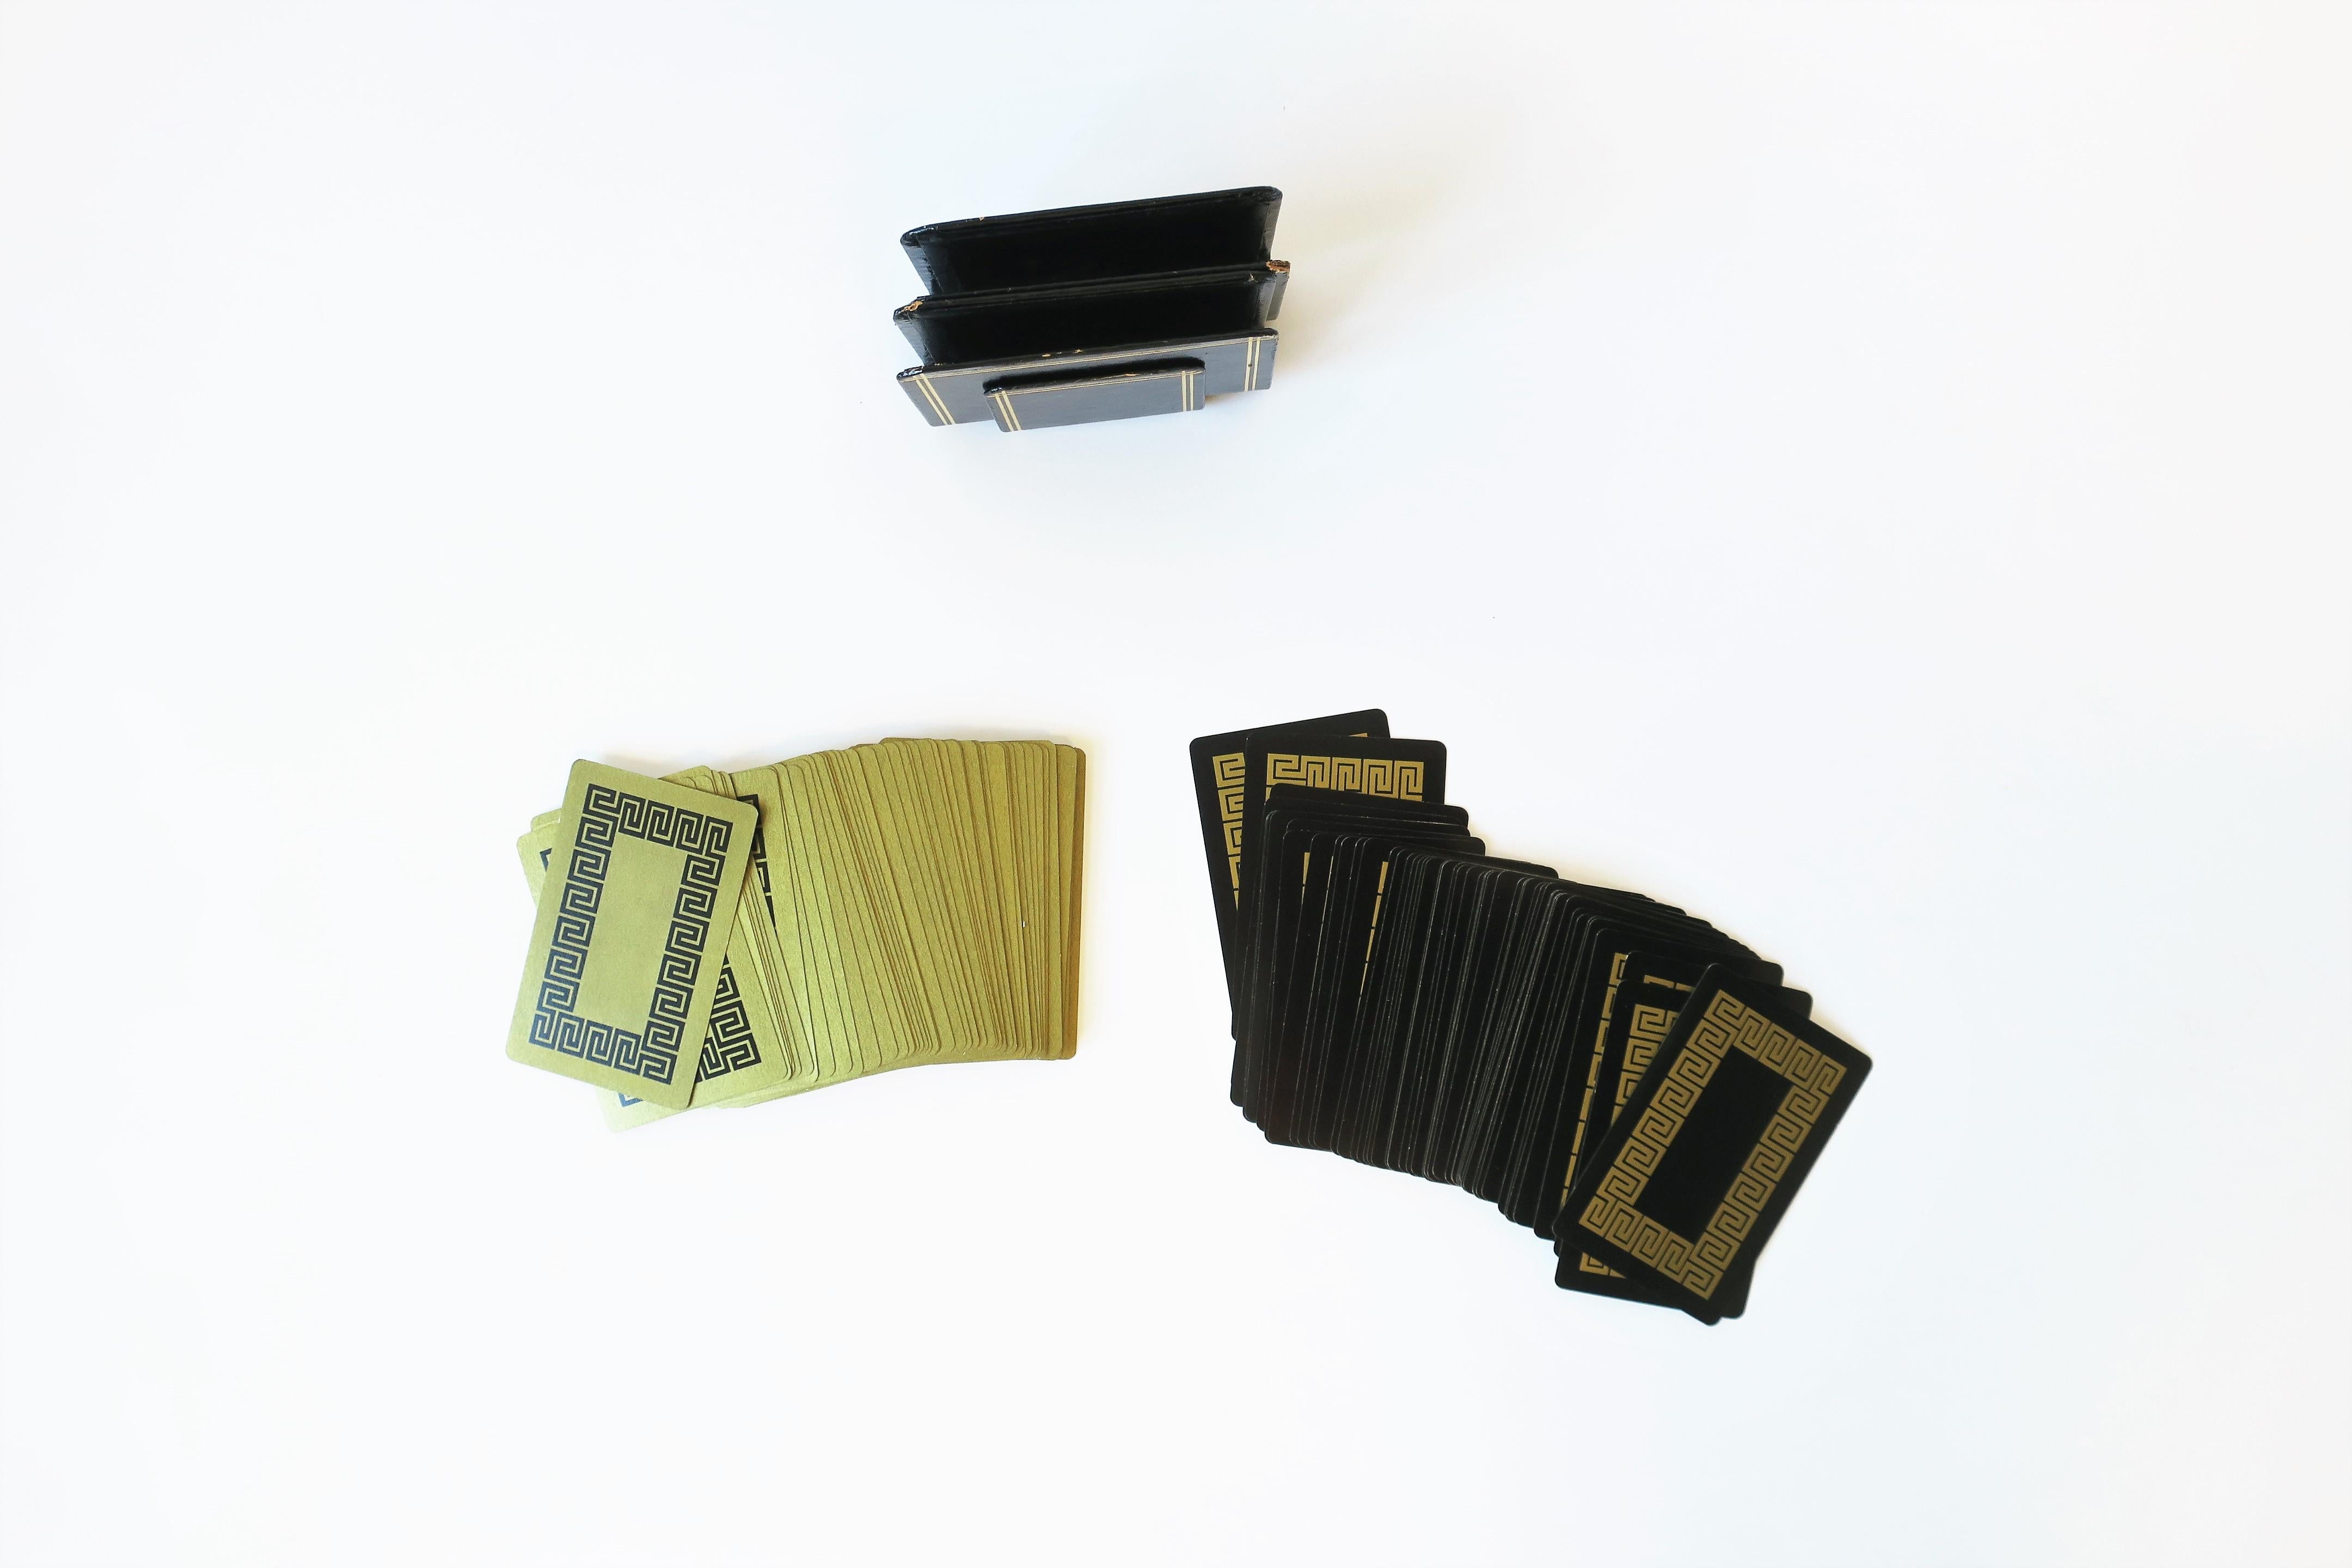 A beautiful double deck set of vintage game playing cards in black and gold with Greek-Key design, circa mid-20th century, Europe, possibly Italy. This set of two decks reside in original high-gloss black and gold embossed holders; decks sit neatly